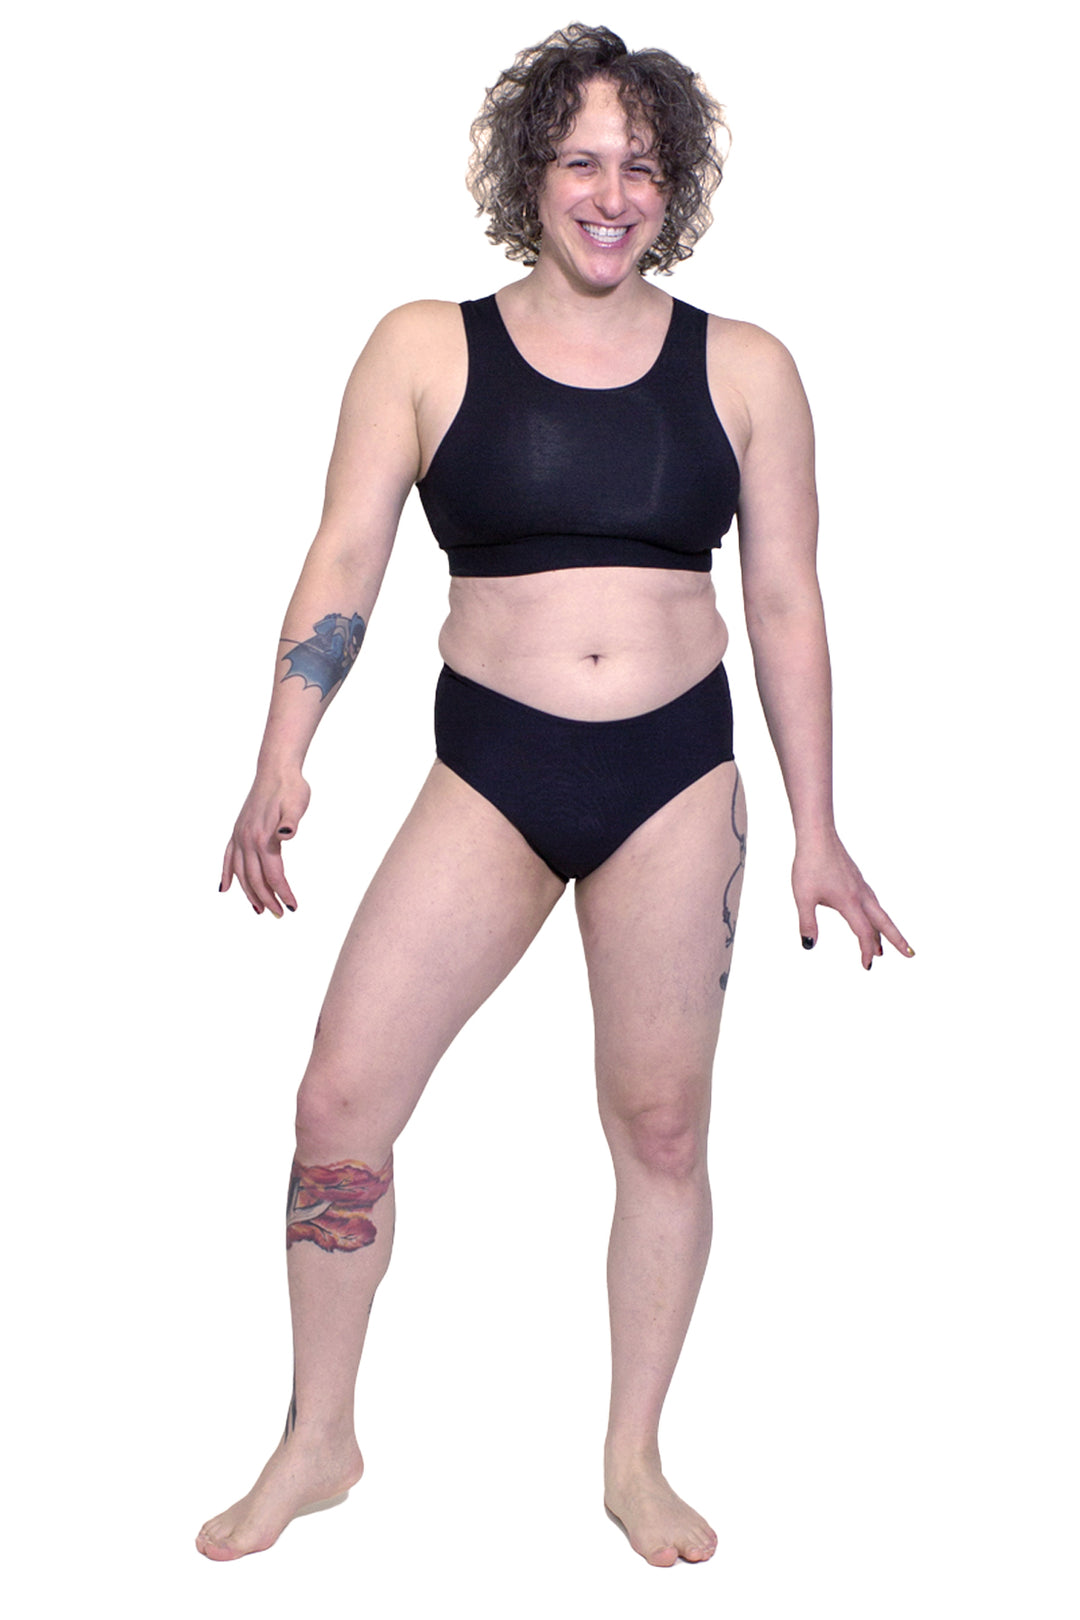 Transfemme person wearing a black tucking underwear compression gaff with a cheeky boyshort cut with a lycra bra, photographed from the front.